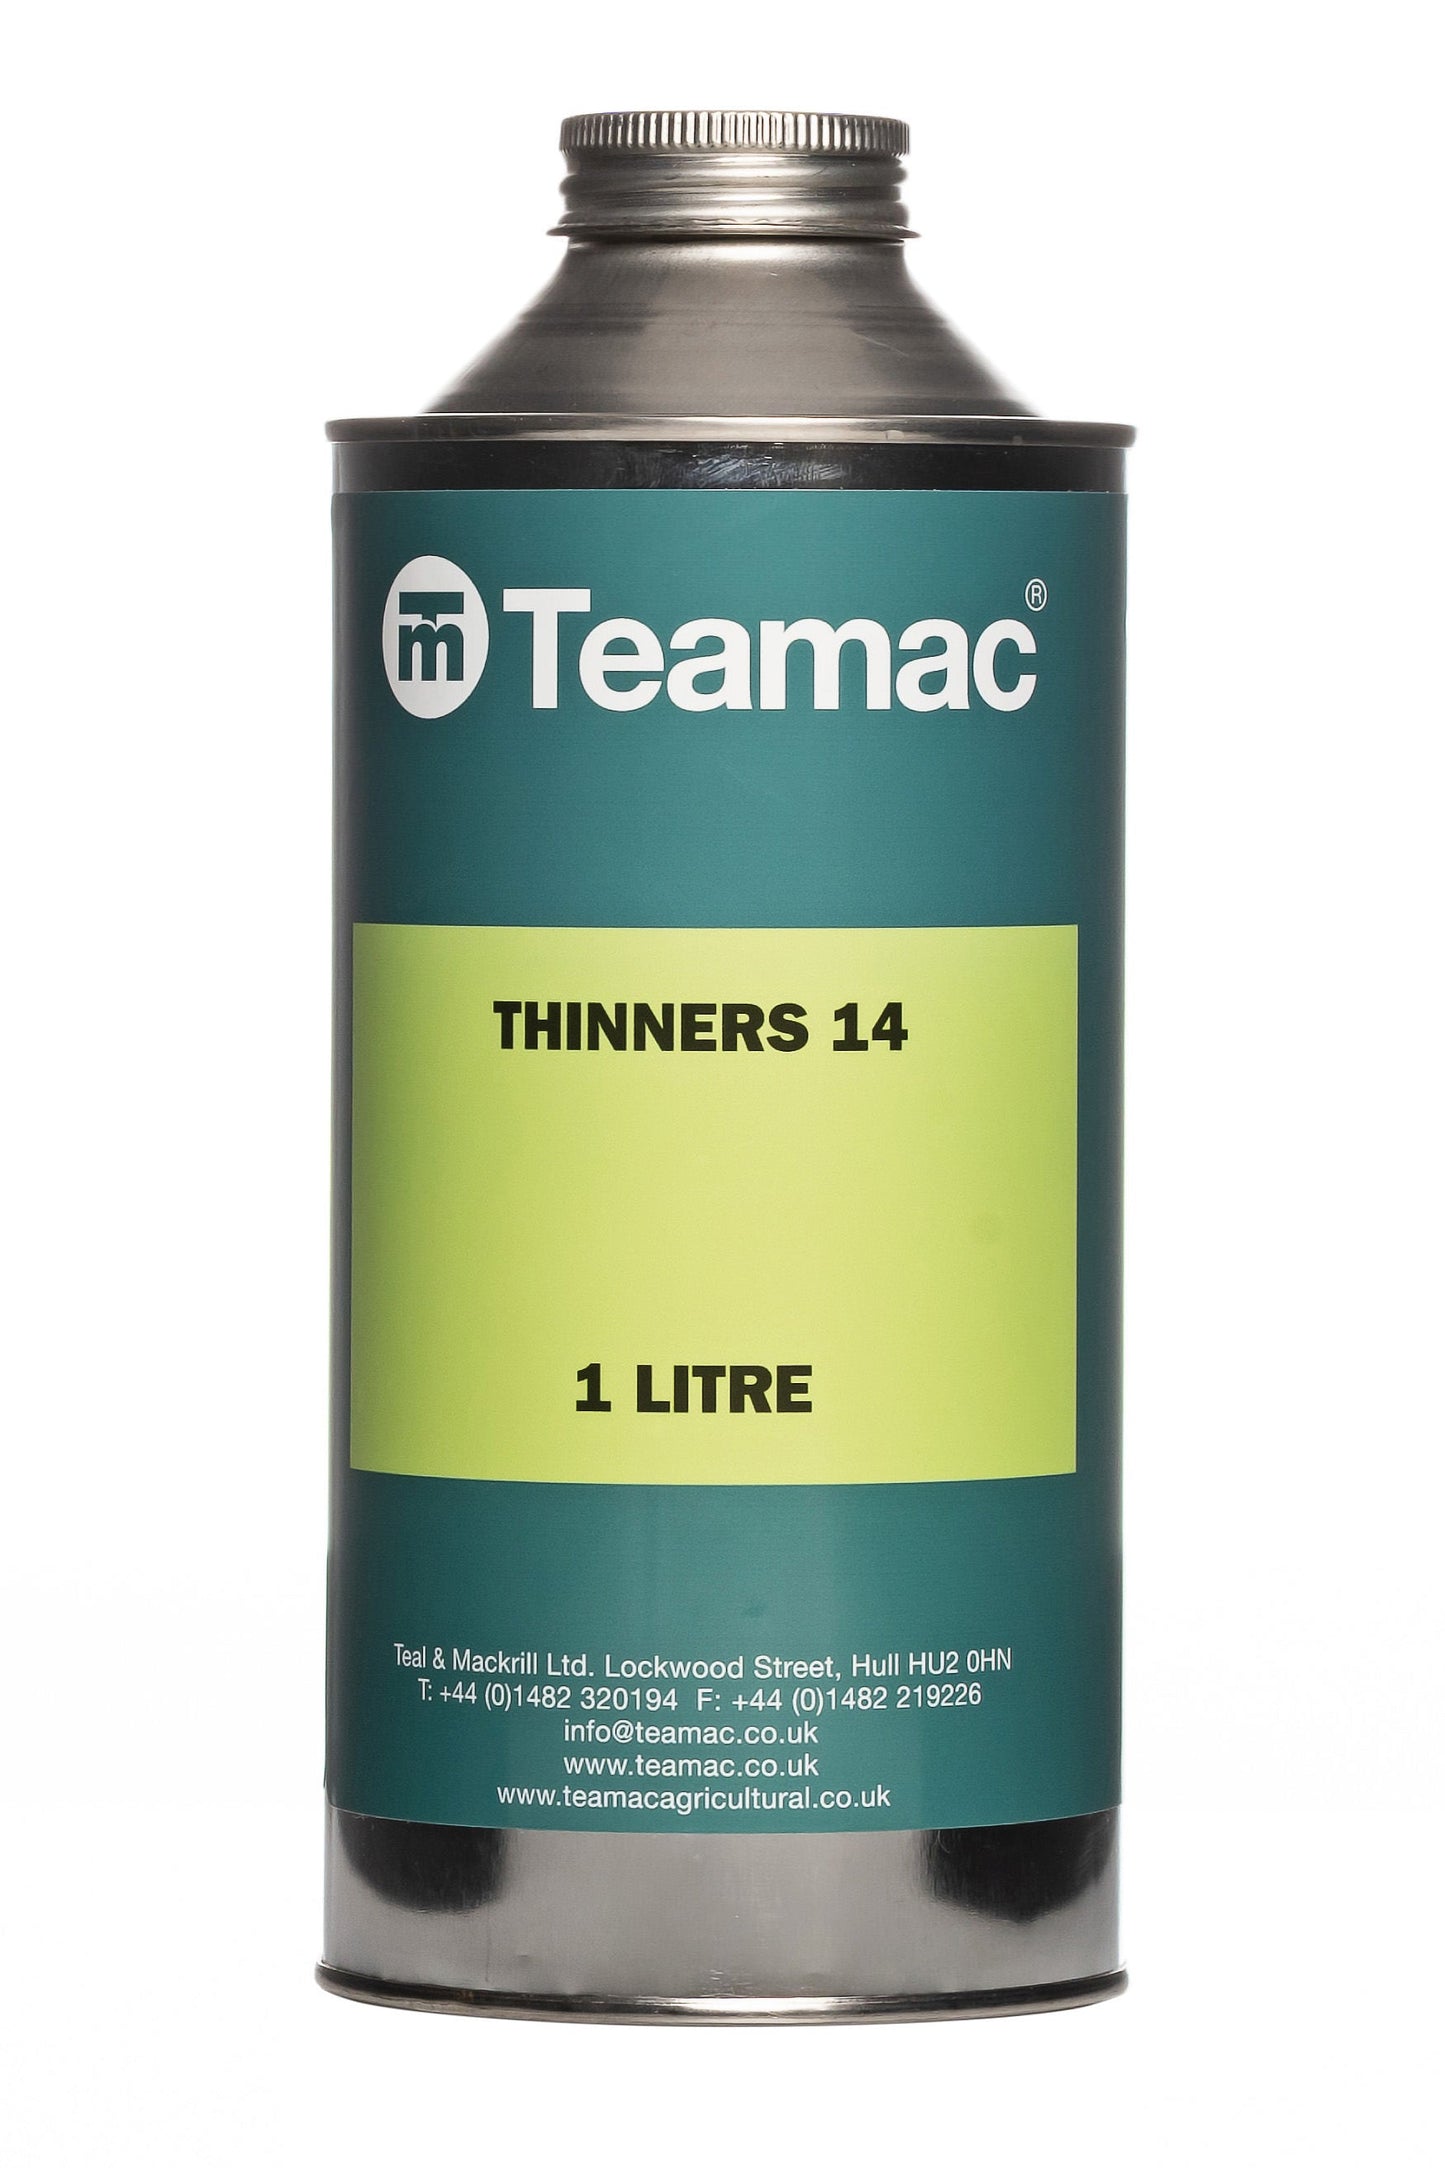 Teamac Agricultural Thinners 14 1L